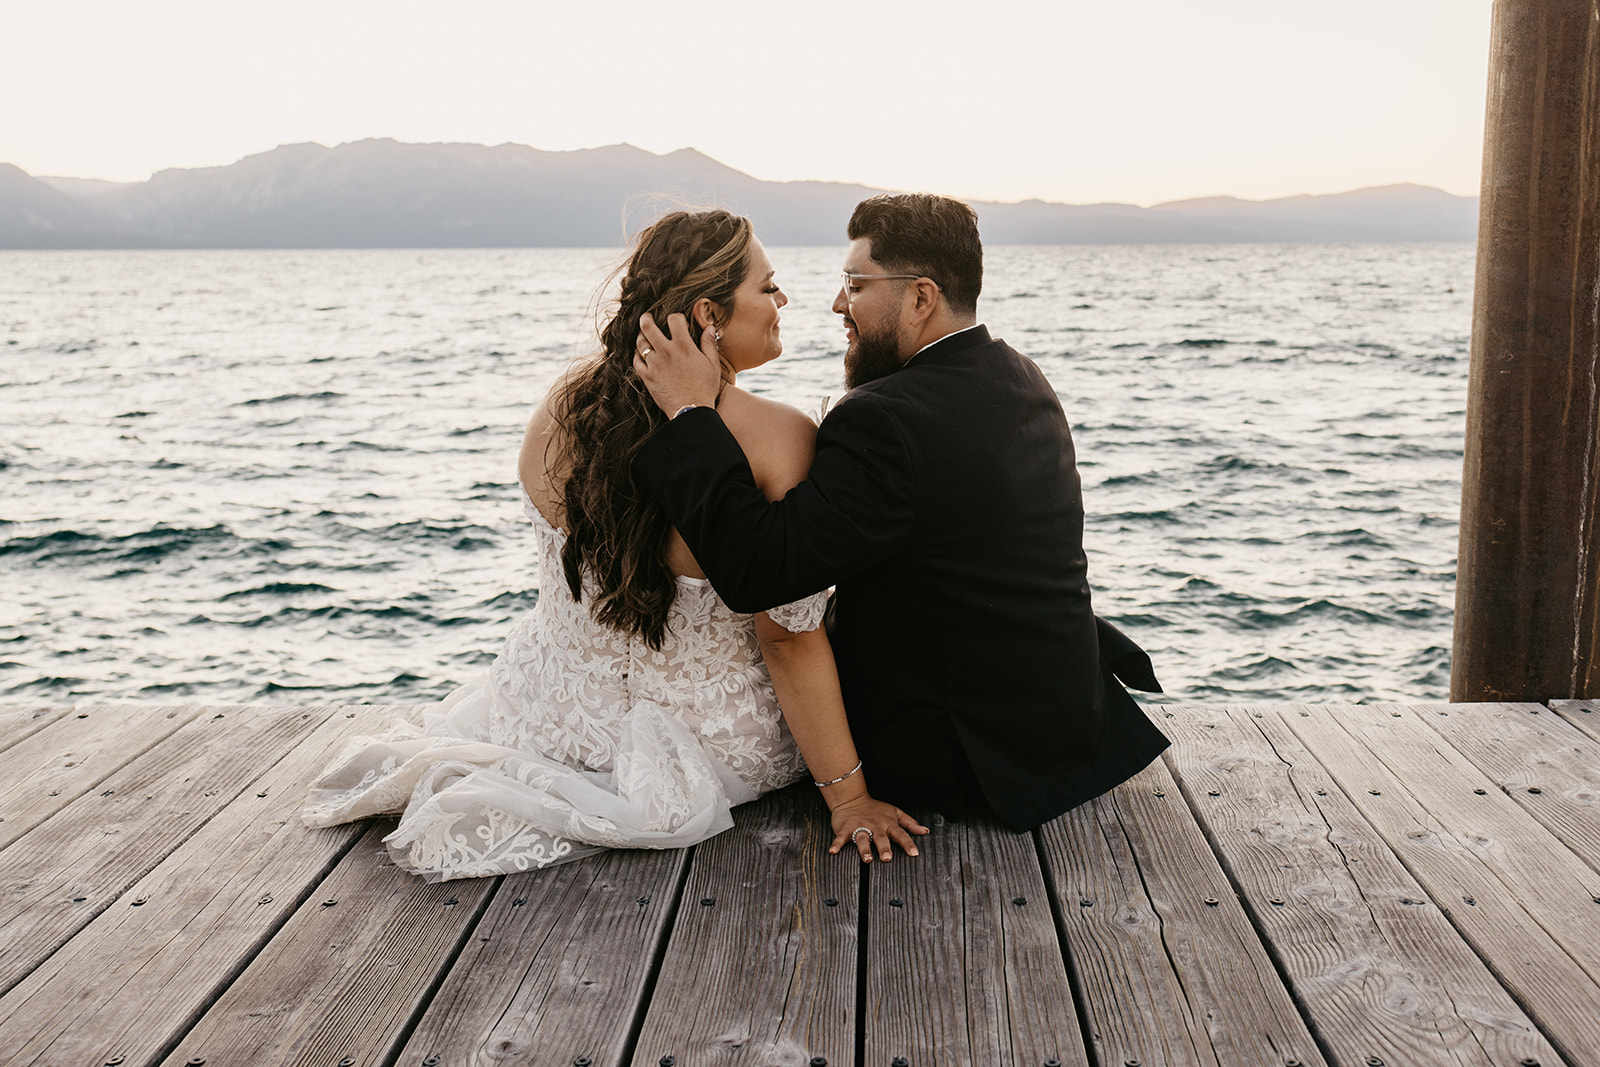 Inspiration for your Autumn Wedding at Round Hill Pines Tahoe; captured by Dani Rawson Photo, a Lake Tahoe Wedding Photographer